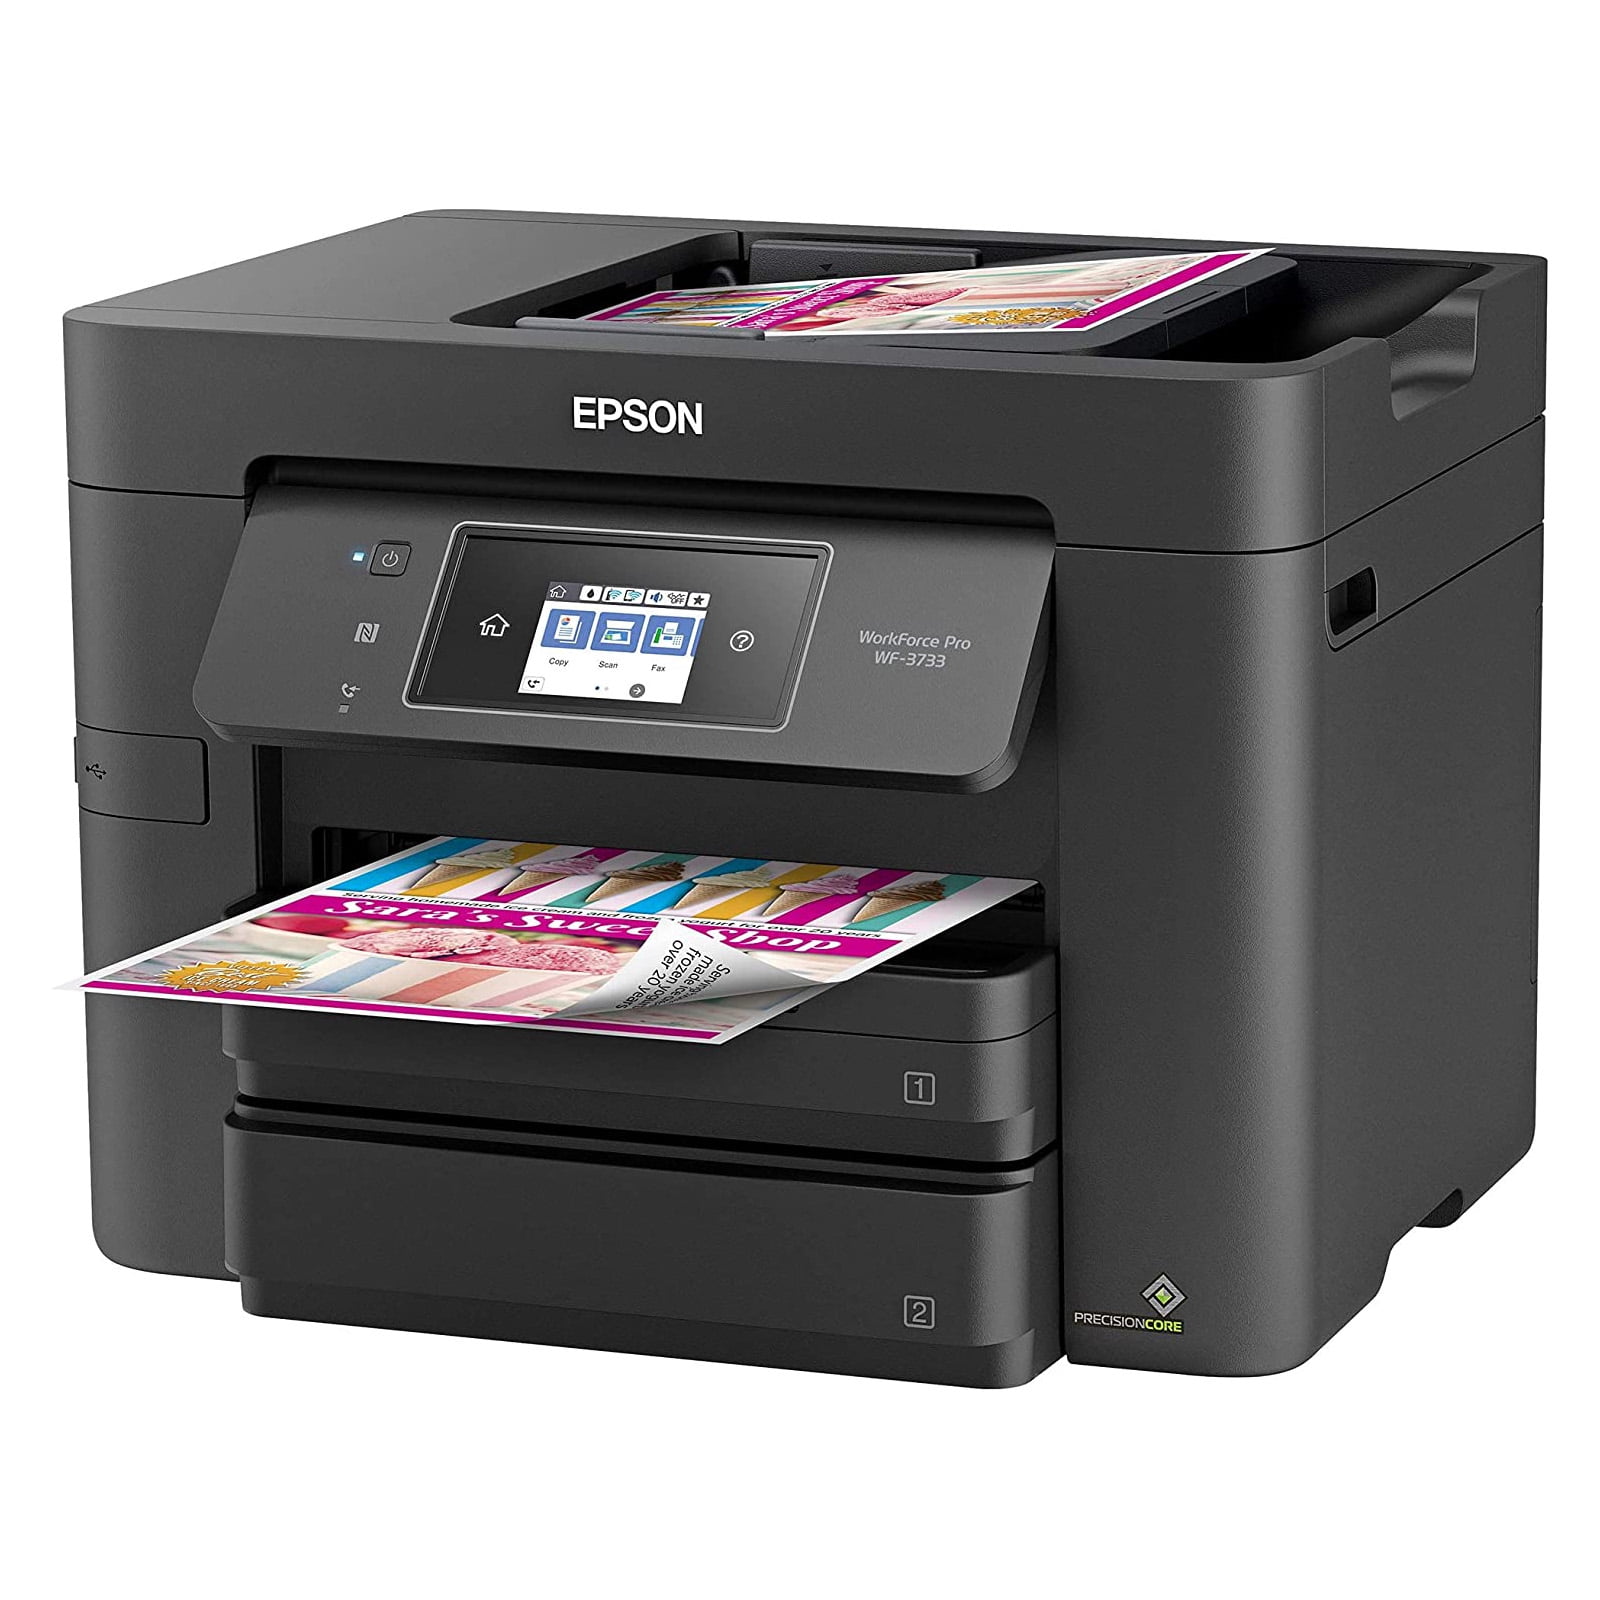 Epson Workforce Pro Wf 3733 Wireless All In One Color Inkjet Printer Home Office Printer 0640